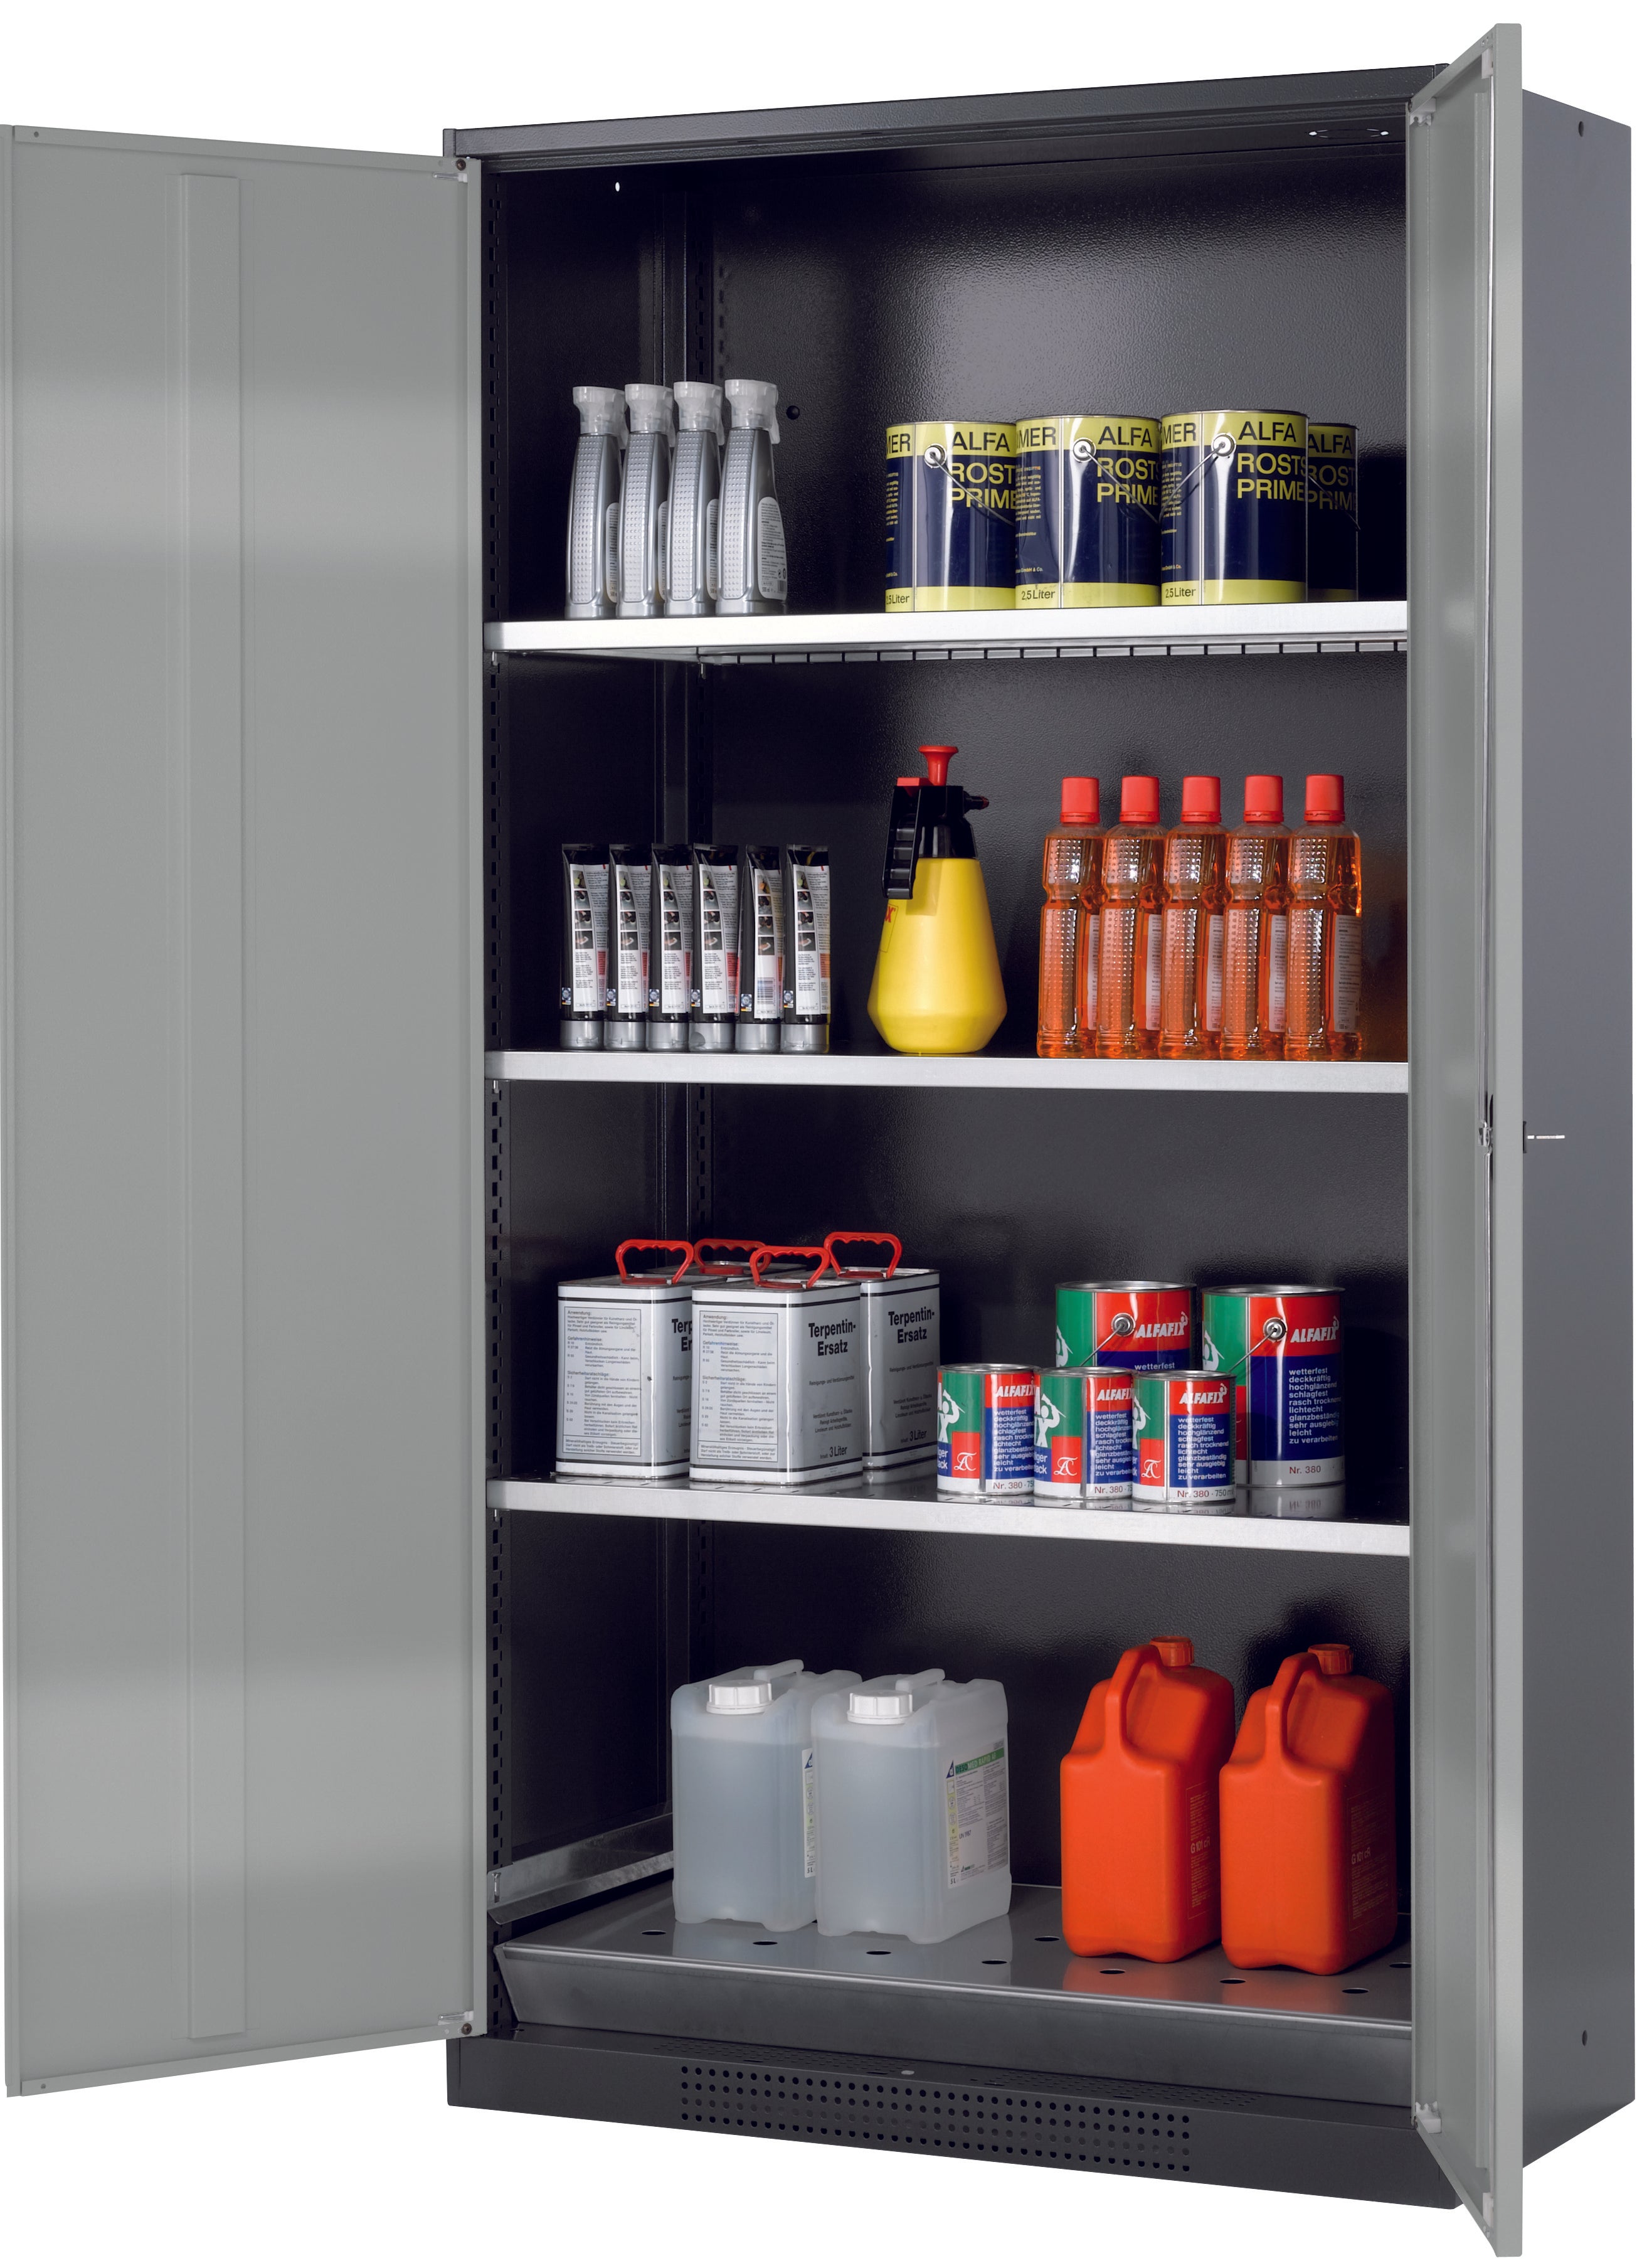 Chemical cabinet CS-CLASSIC model CS.195.105 in asecos silver with 3x standard shelves (sheet steel)